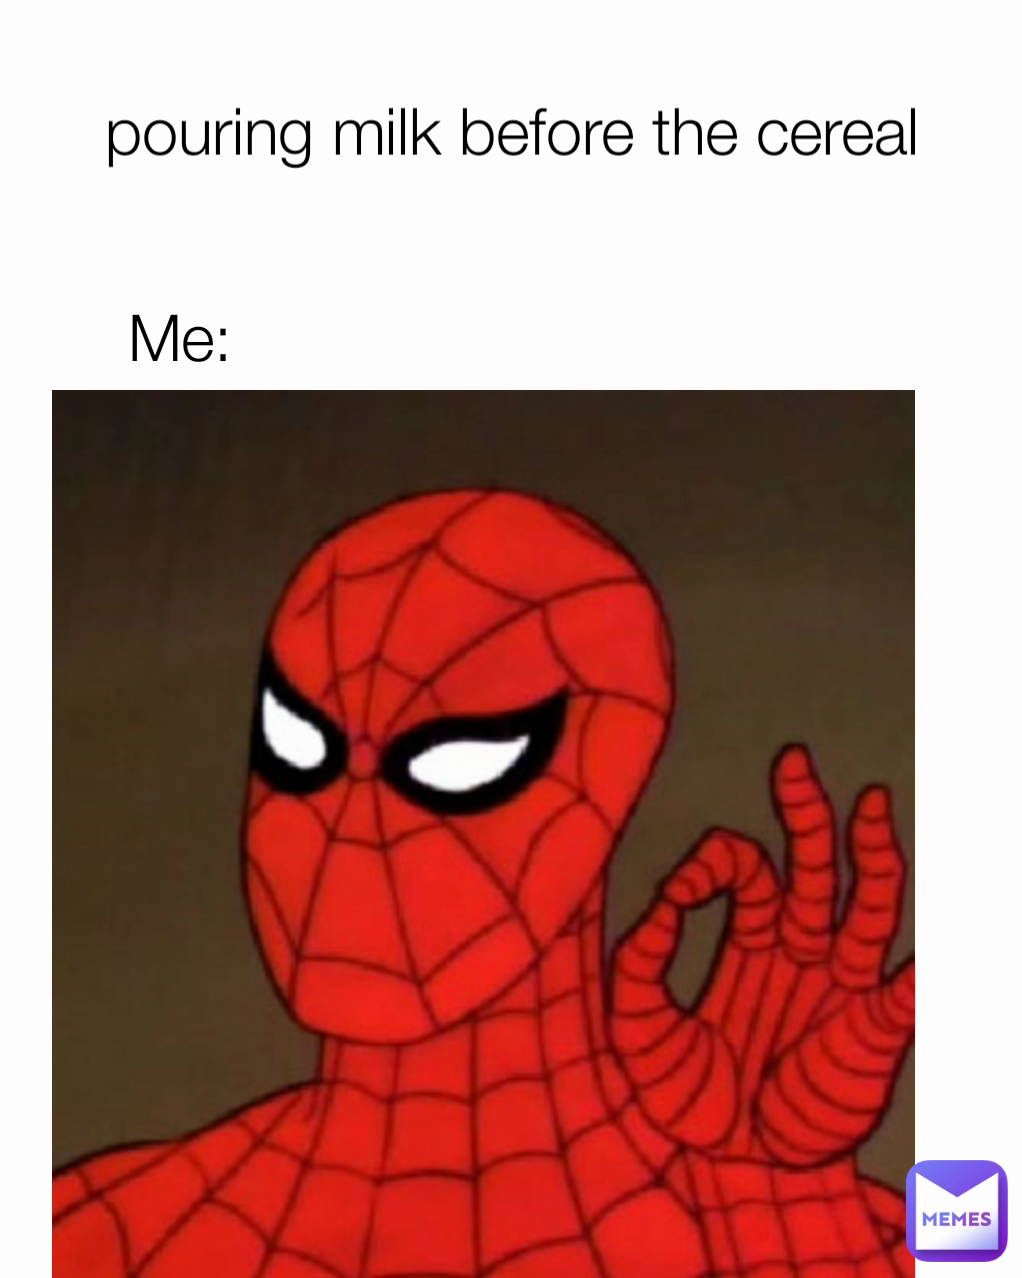 Me: pouring milk before the cereal